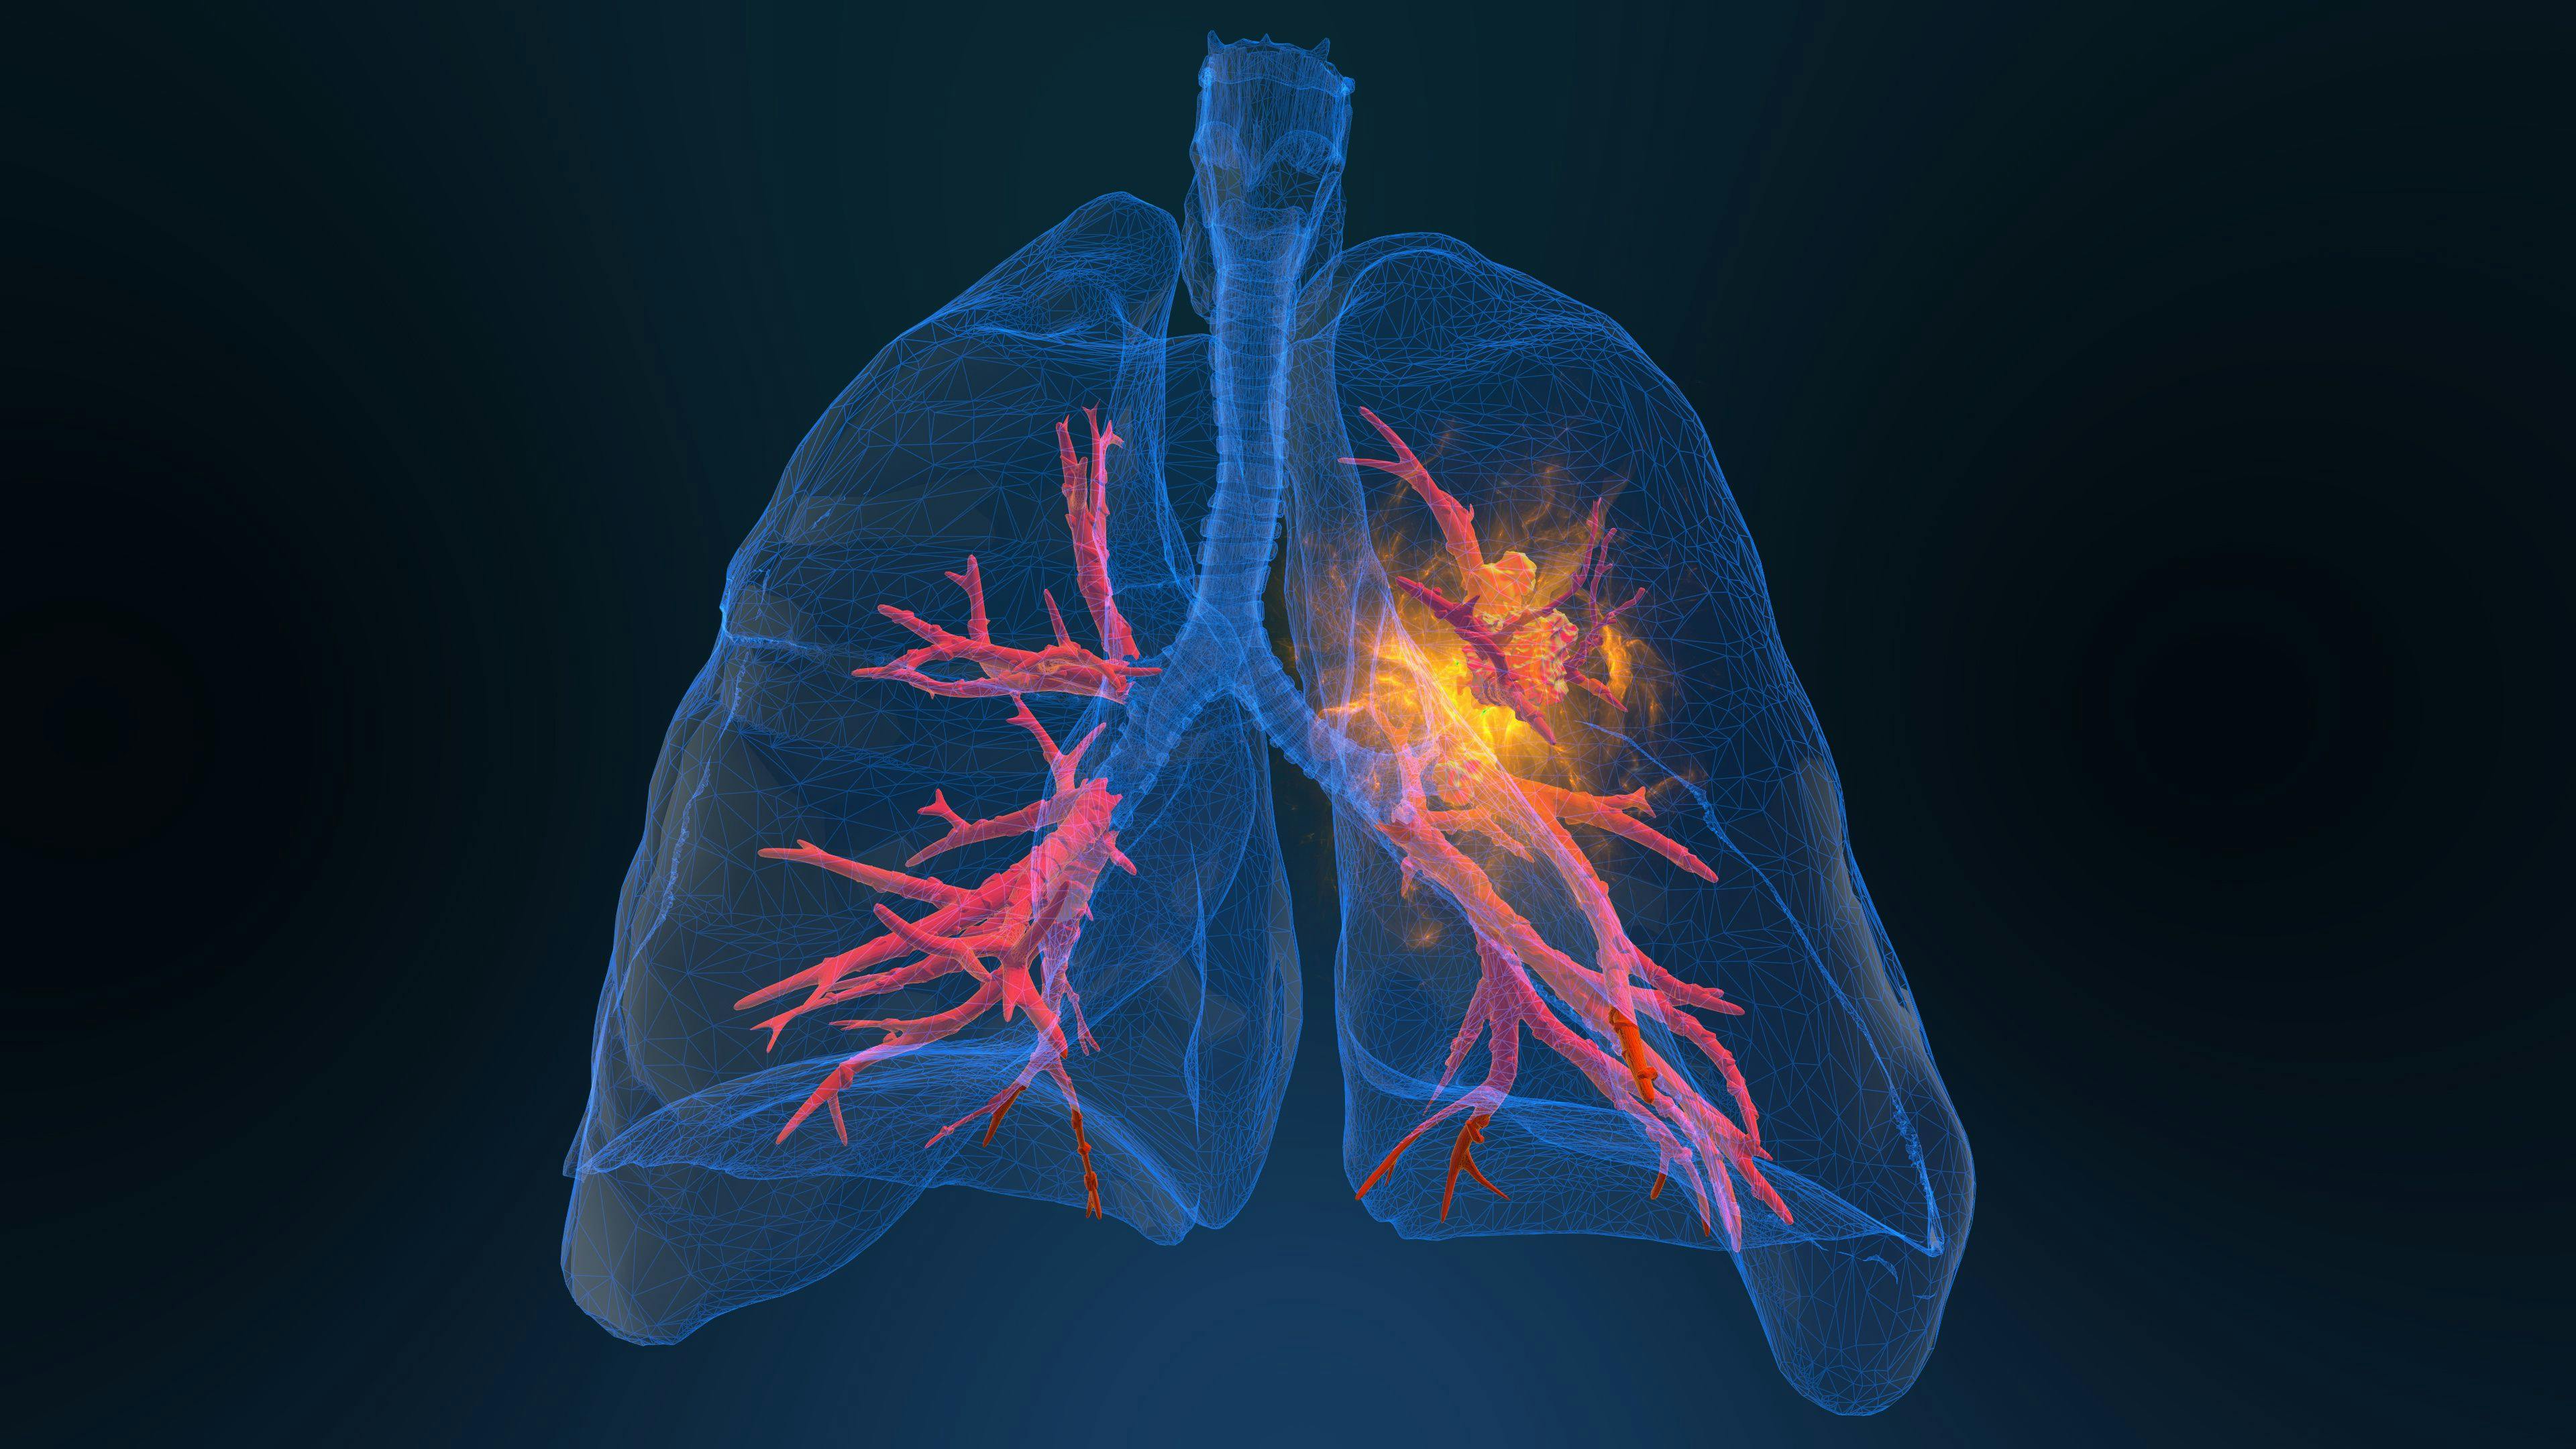 Phase III Trial for Keytruda Combination in Lung Cancer Stopped for Lack of Survival Benefit